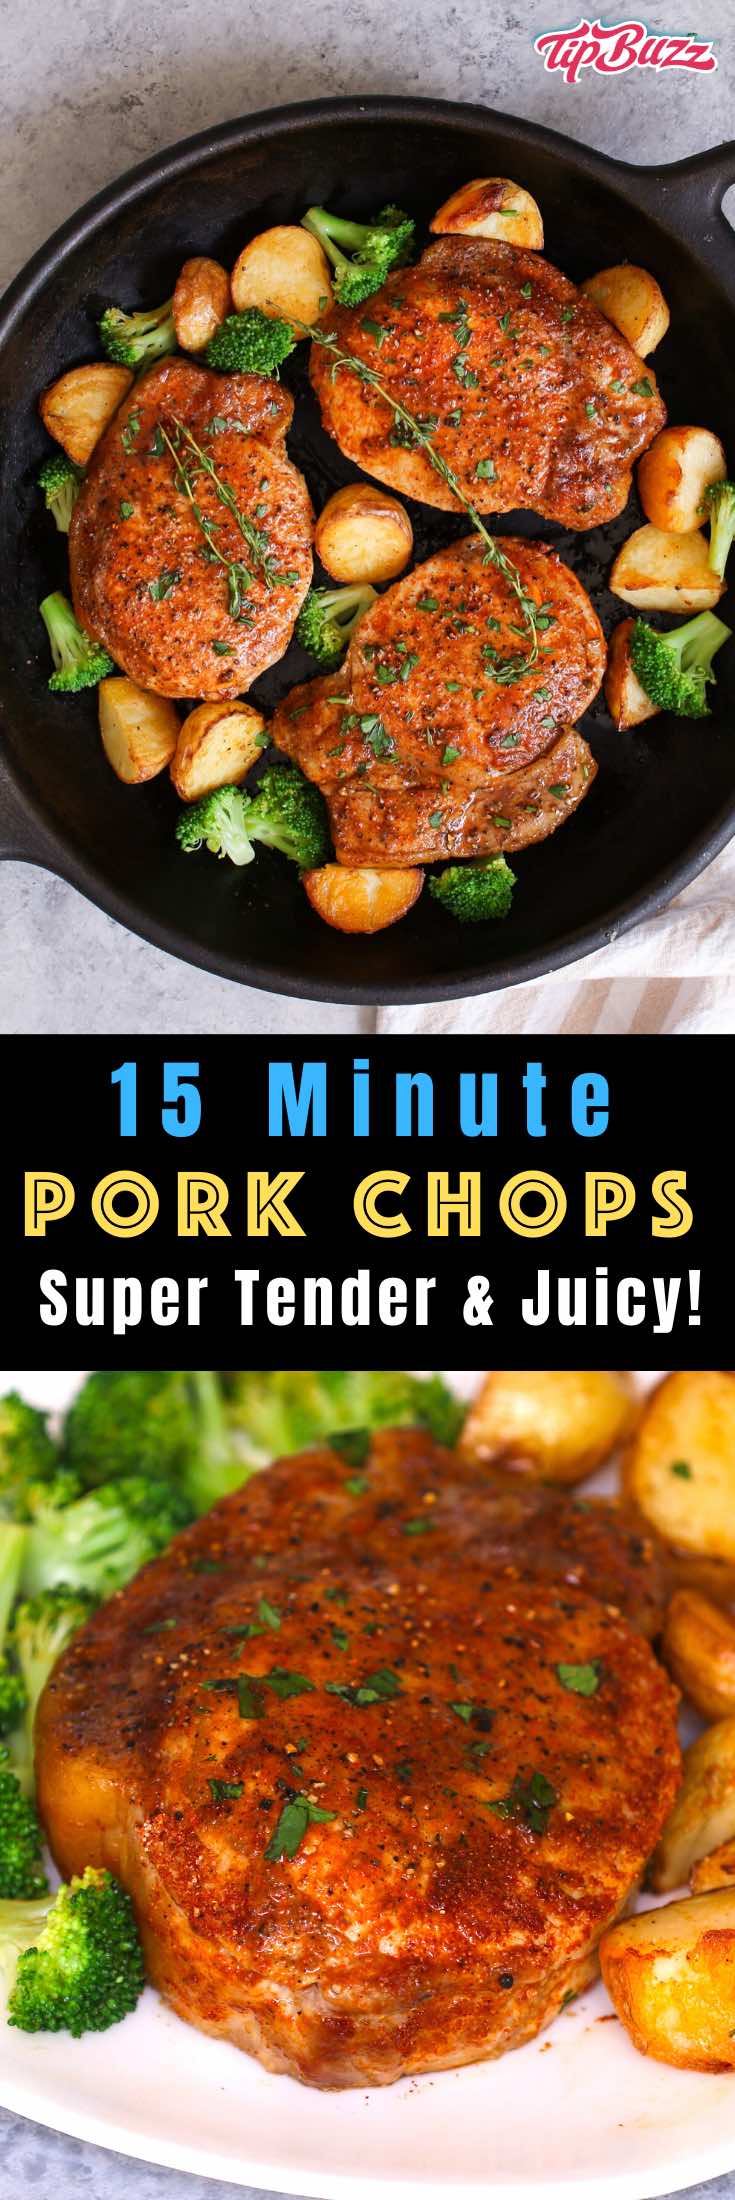 These pan-fried Boneless Pork Chops are a juicy and flavorful meal that’ll be on your table in just 15 minutes, with no marinating or breading required. Perfect for a quick weeknight dinner!